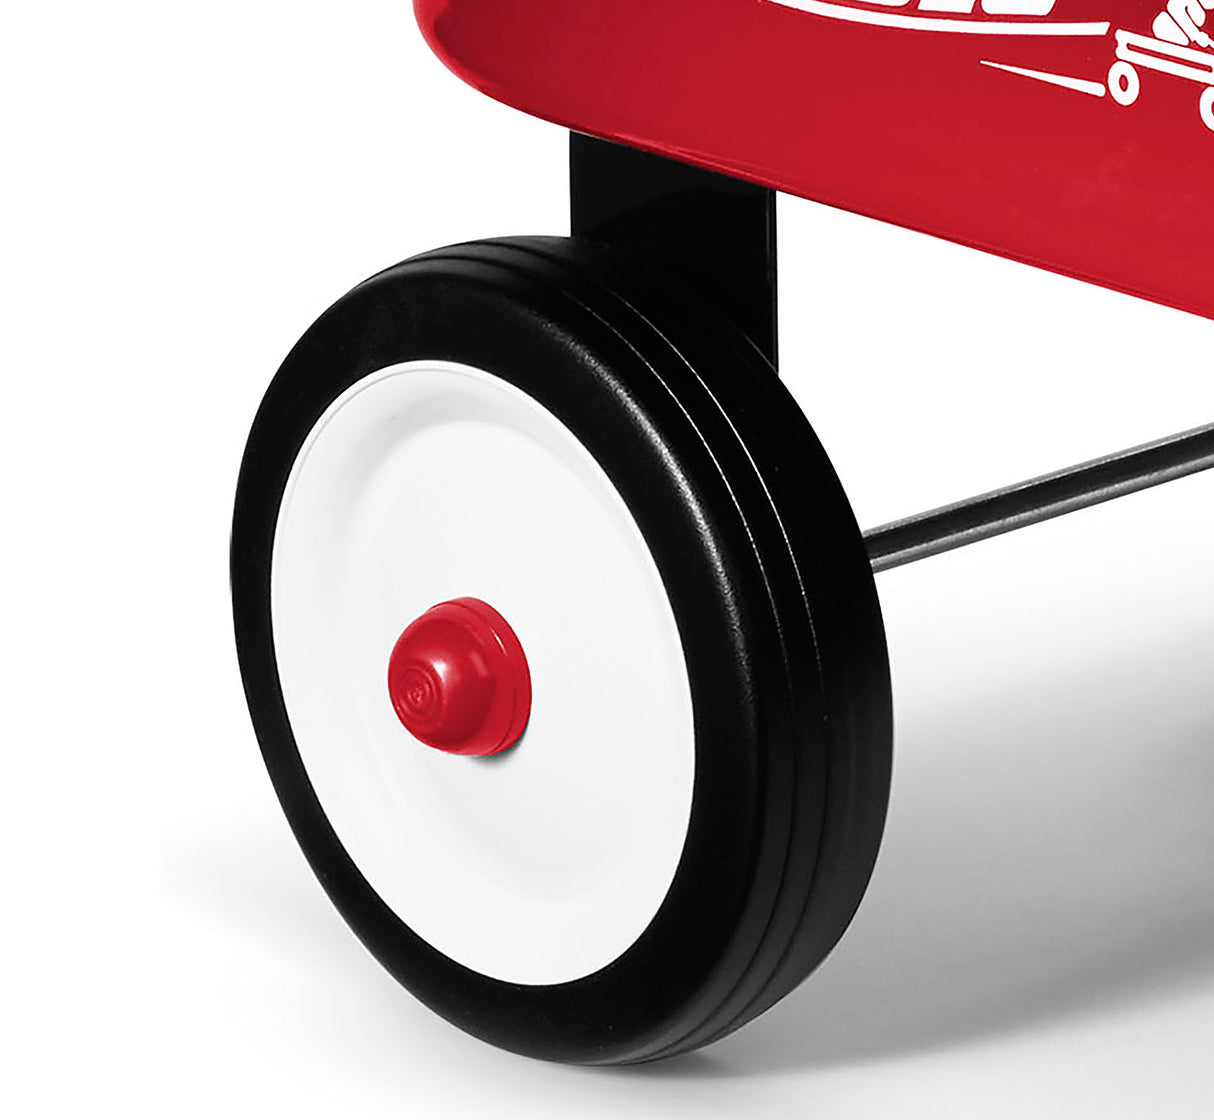 Durable rolling wheels for lasting quality.